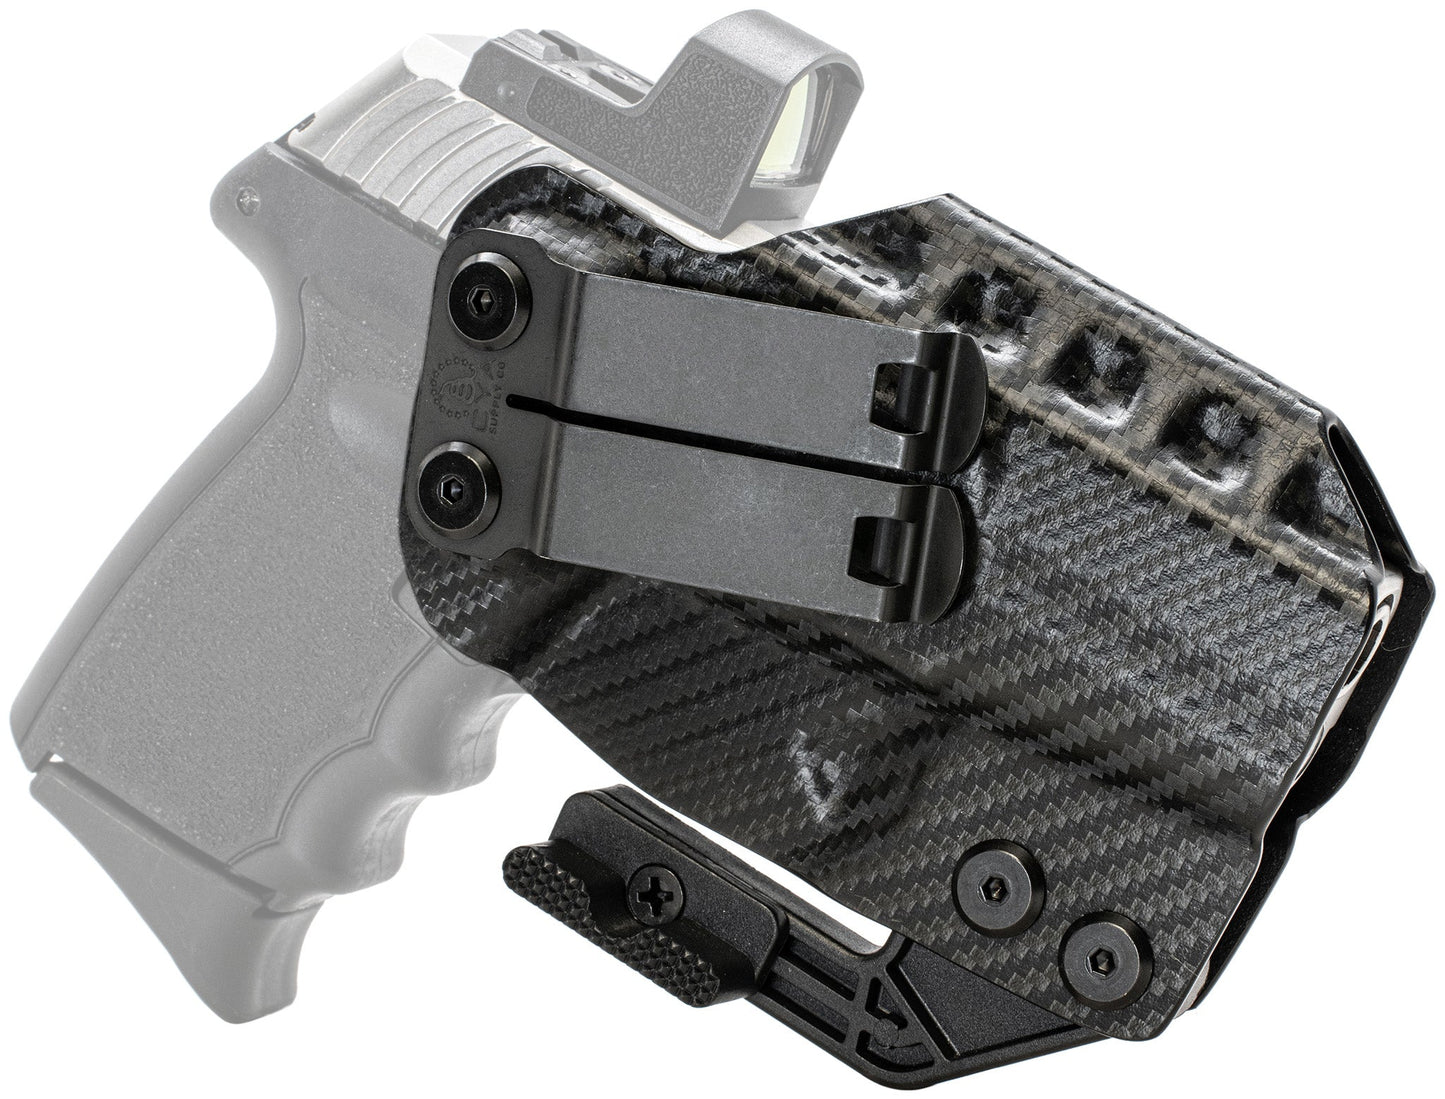 SCCY DVG-1 Holster CYA Supply Co.